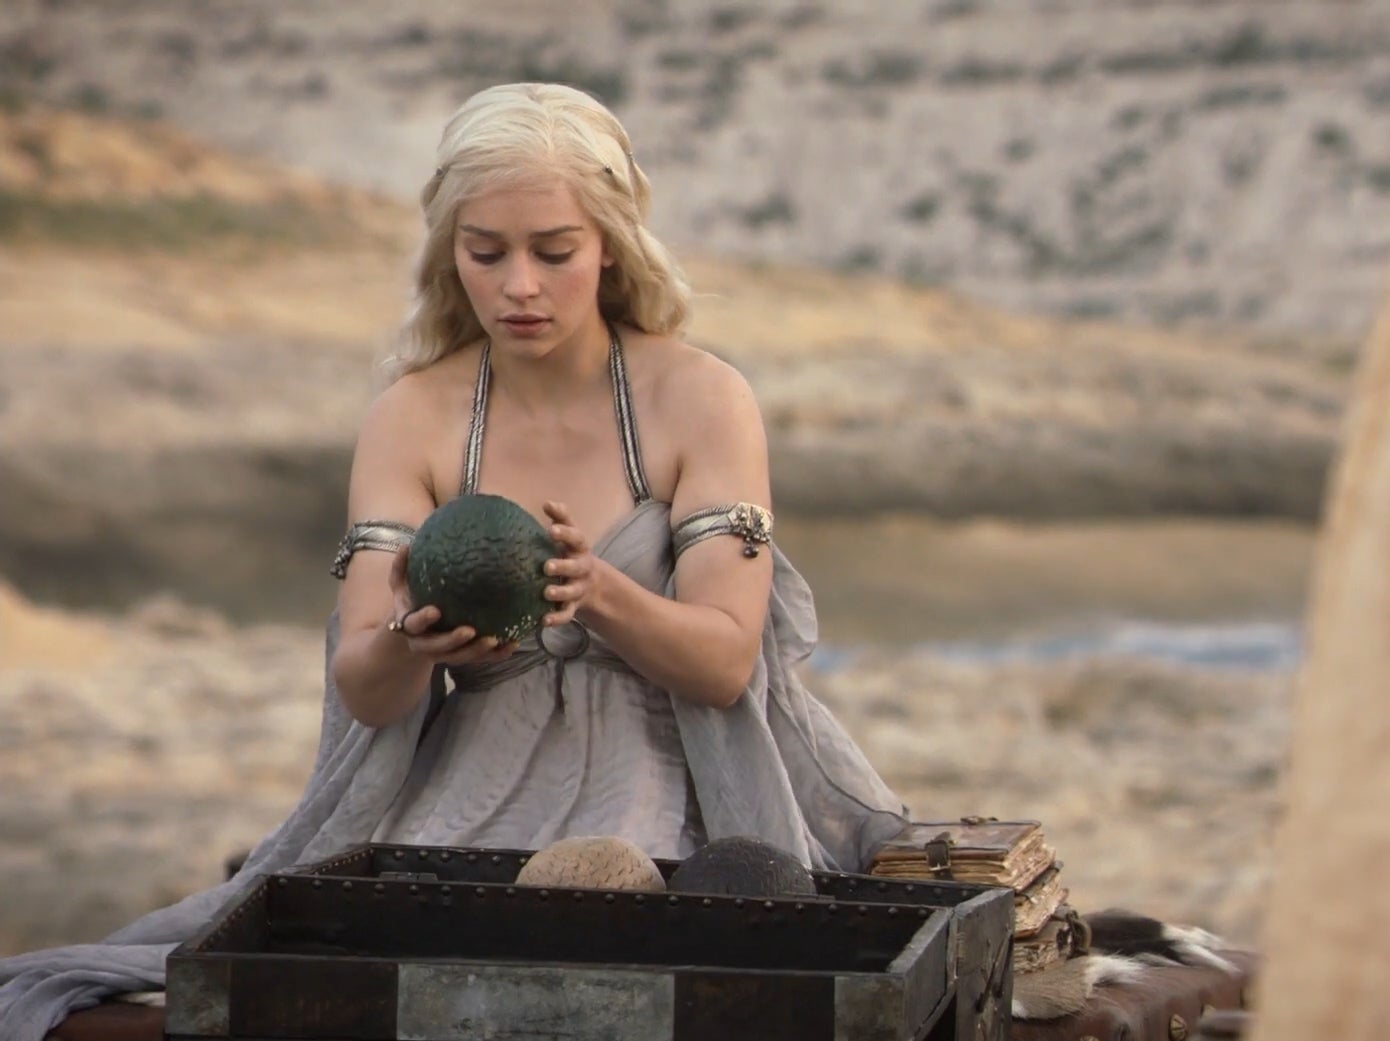 Daenerys holding a dragon egg in Game of Thrones